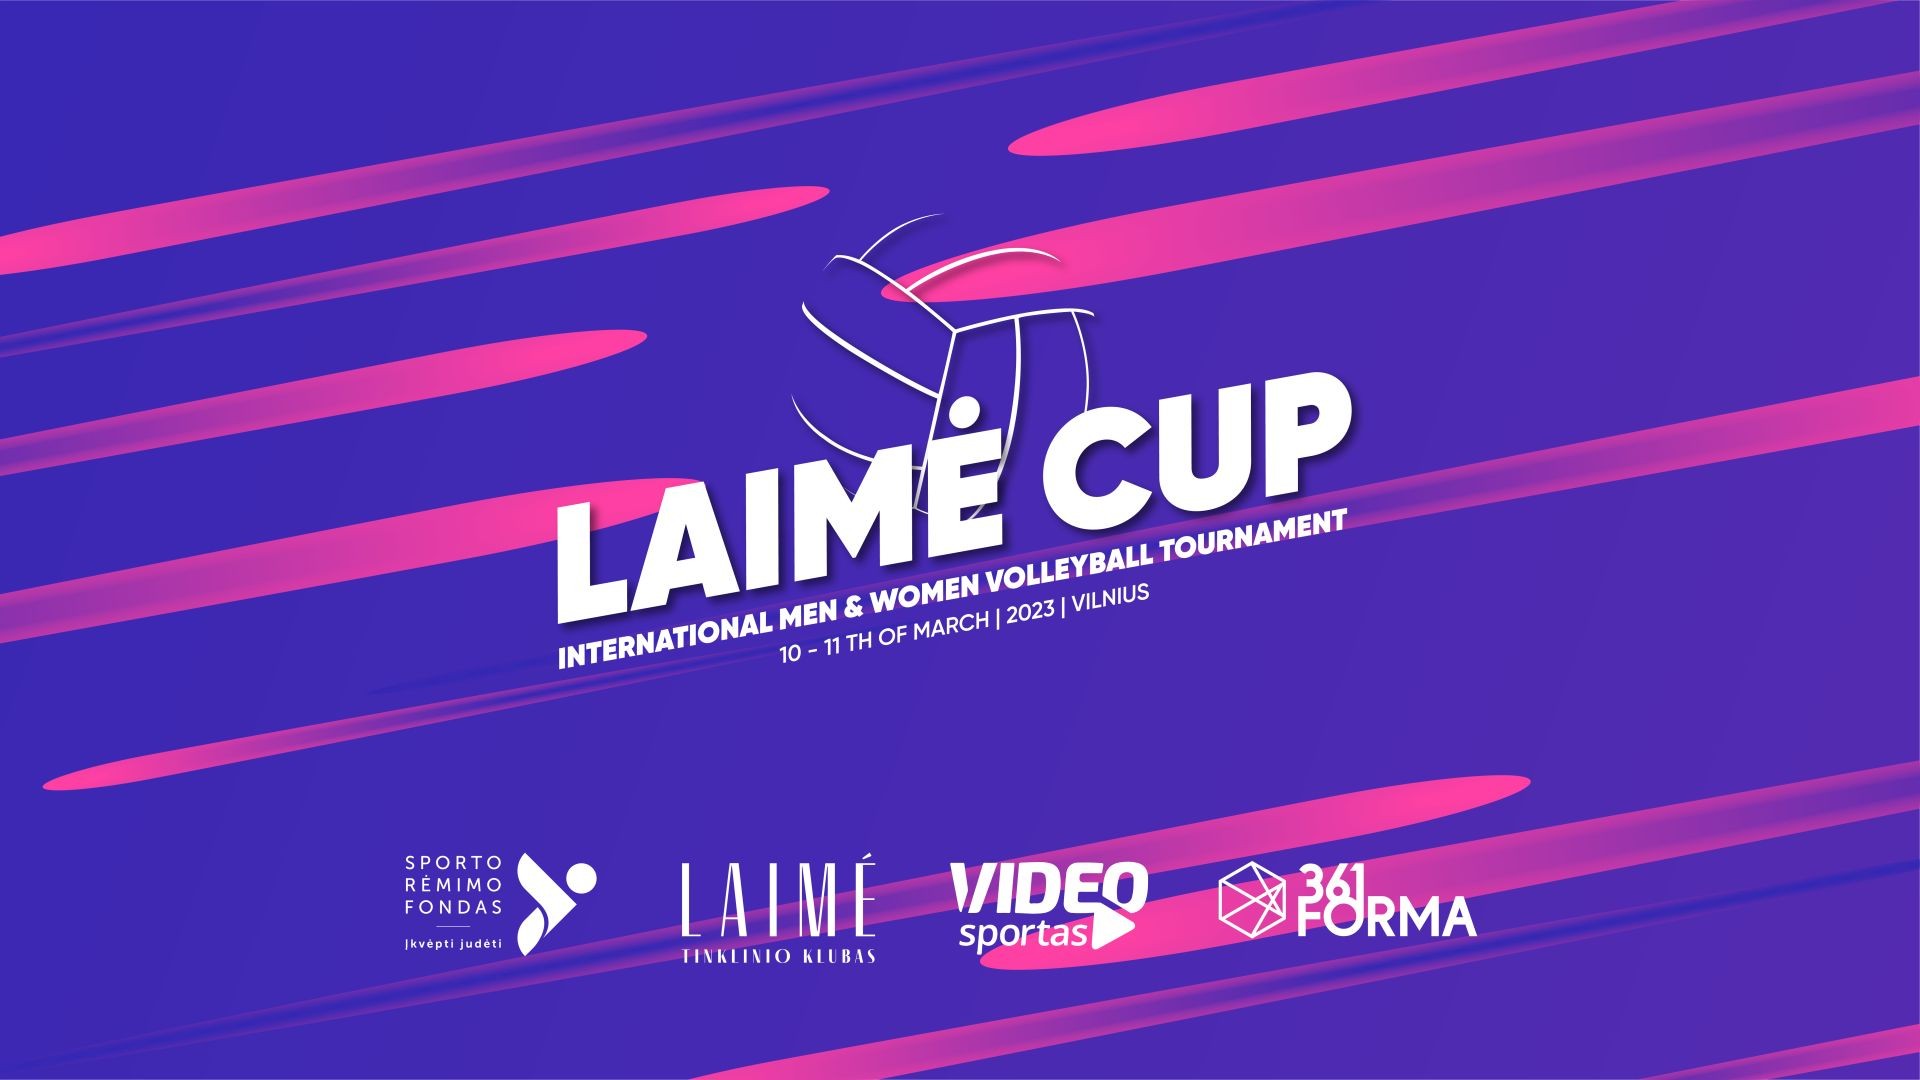 Day 2 | International Men&Women Volleyball Tournament LAIME CUP 2023